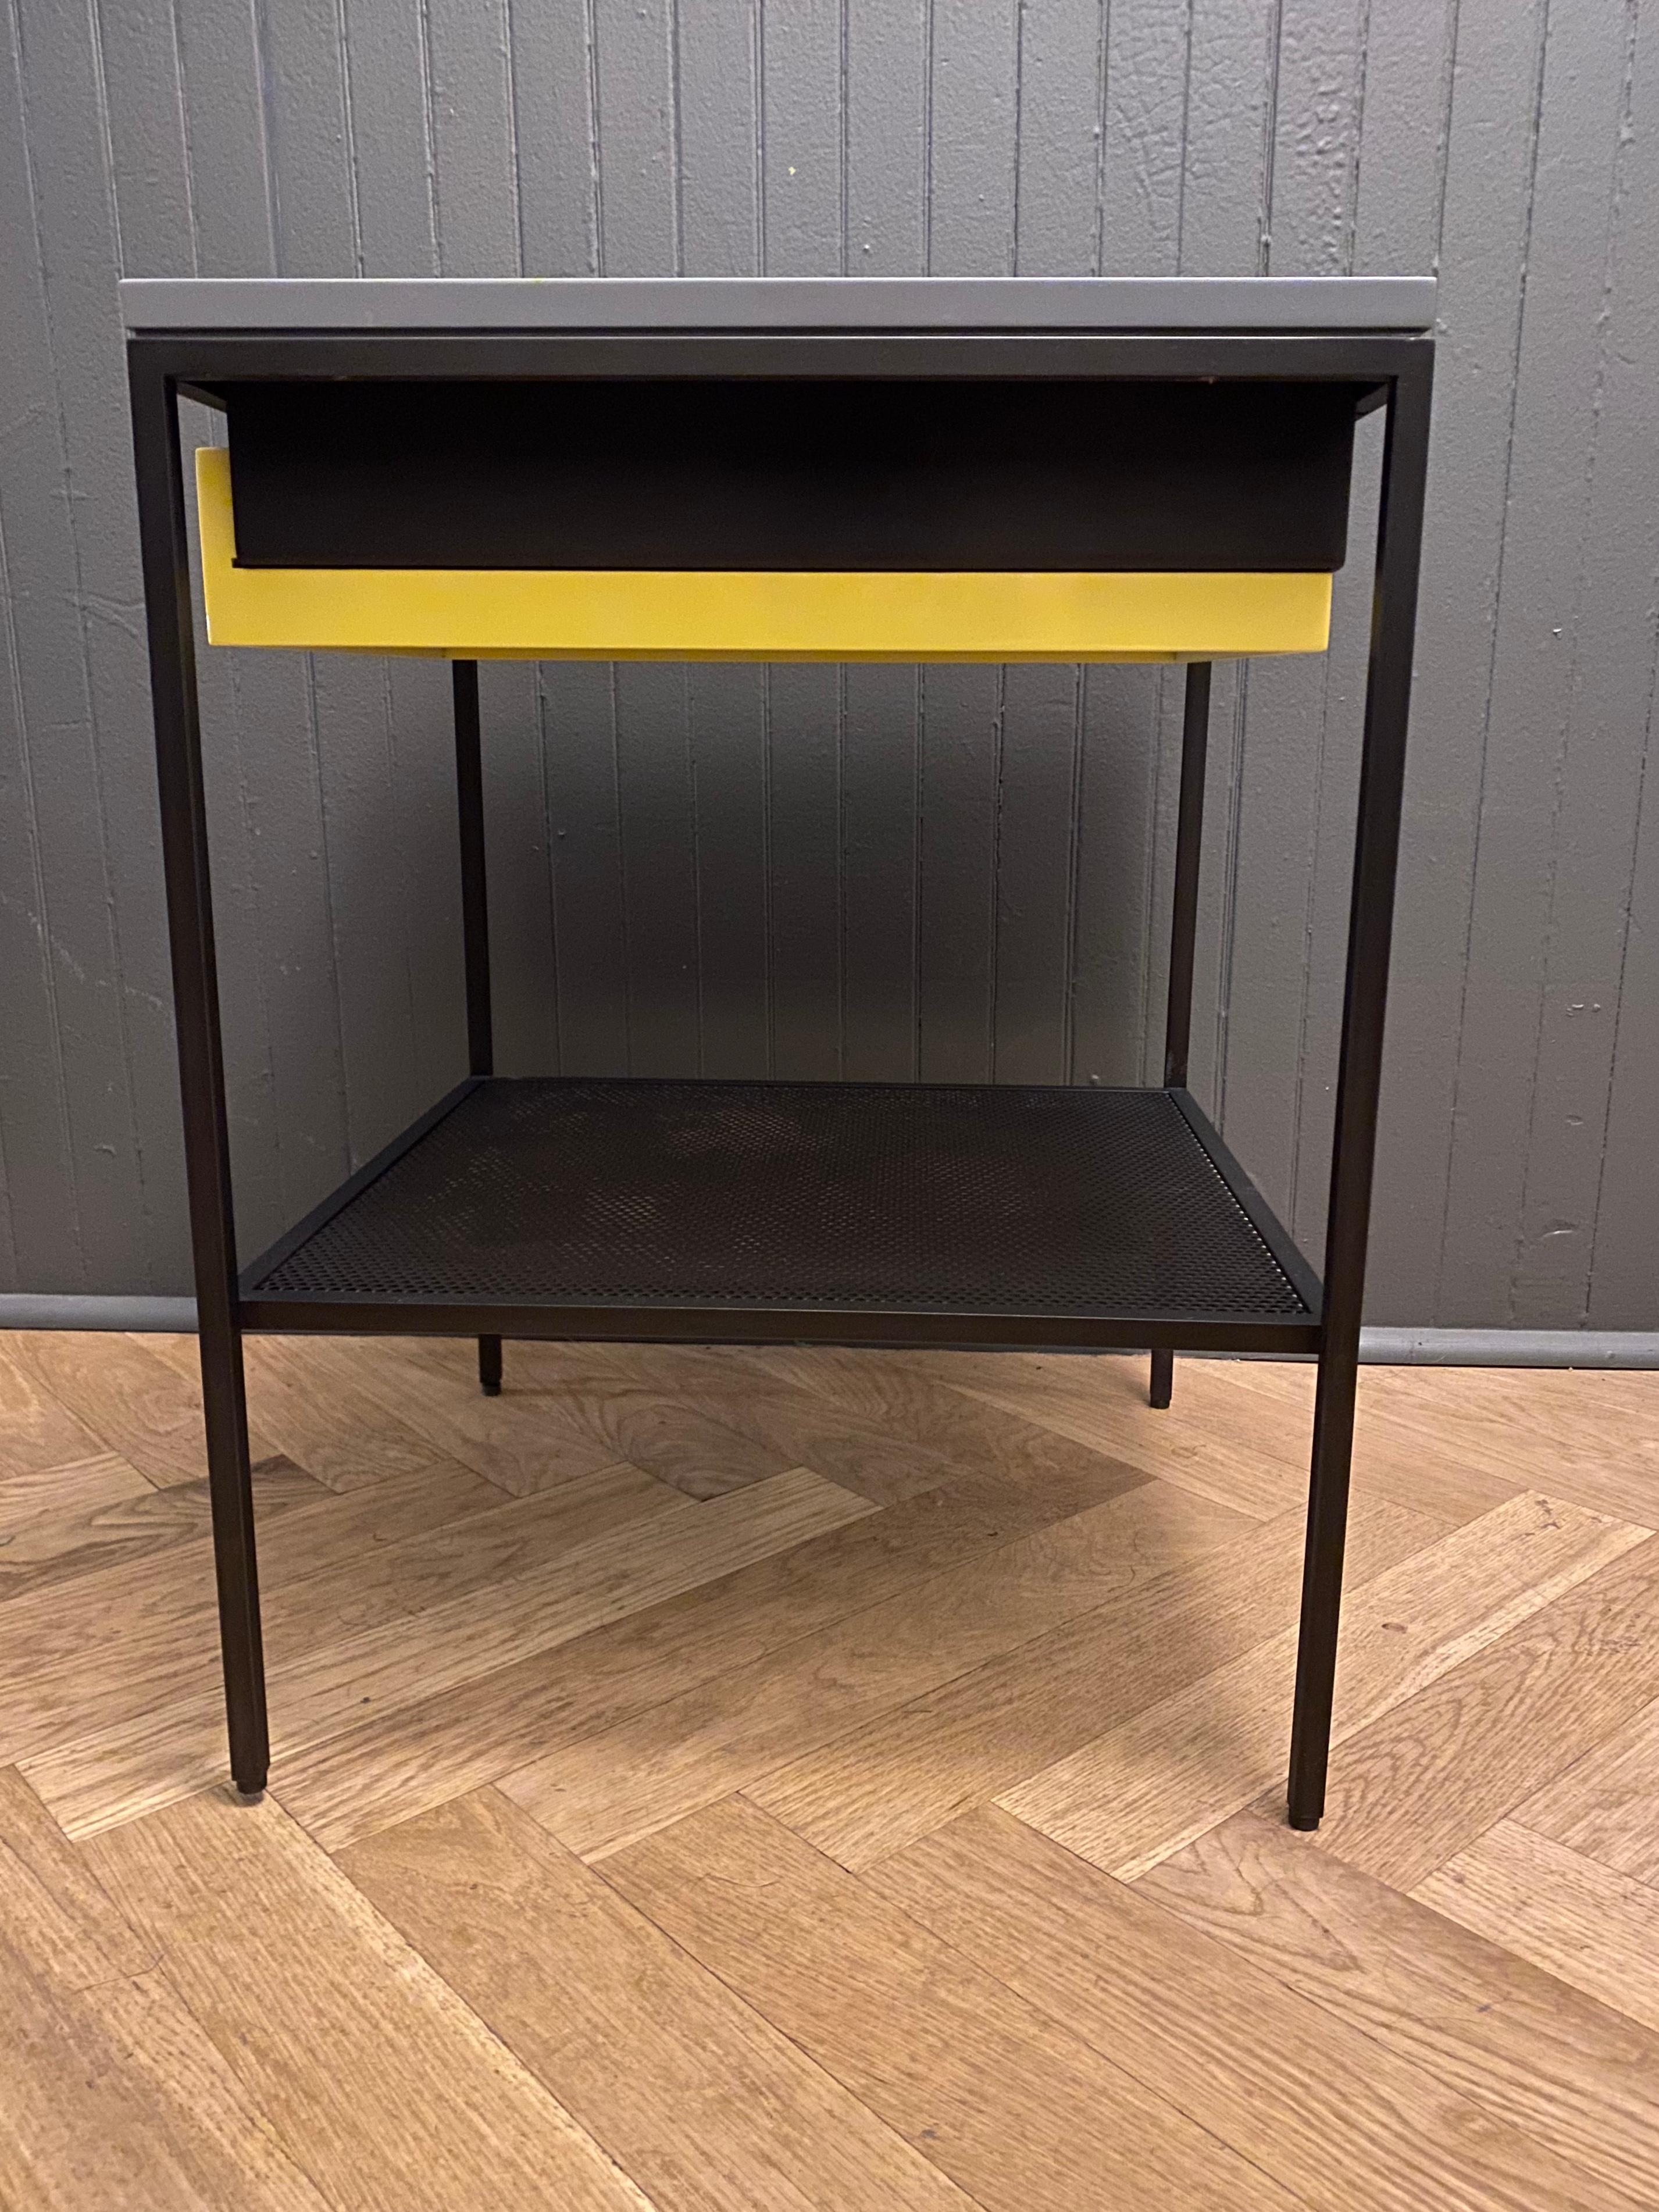 Lacquered components on a blackened steel frame with perforated wire shelf. Single table in stock as shown with gray top and yellow drawer or made to order.